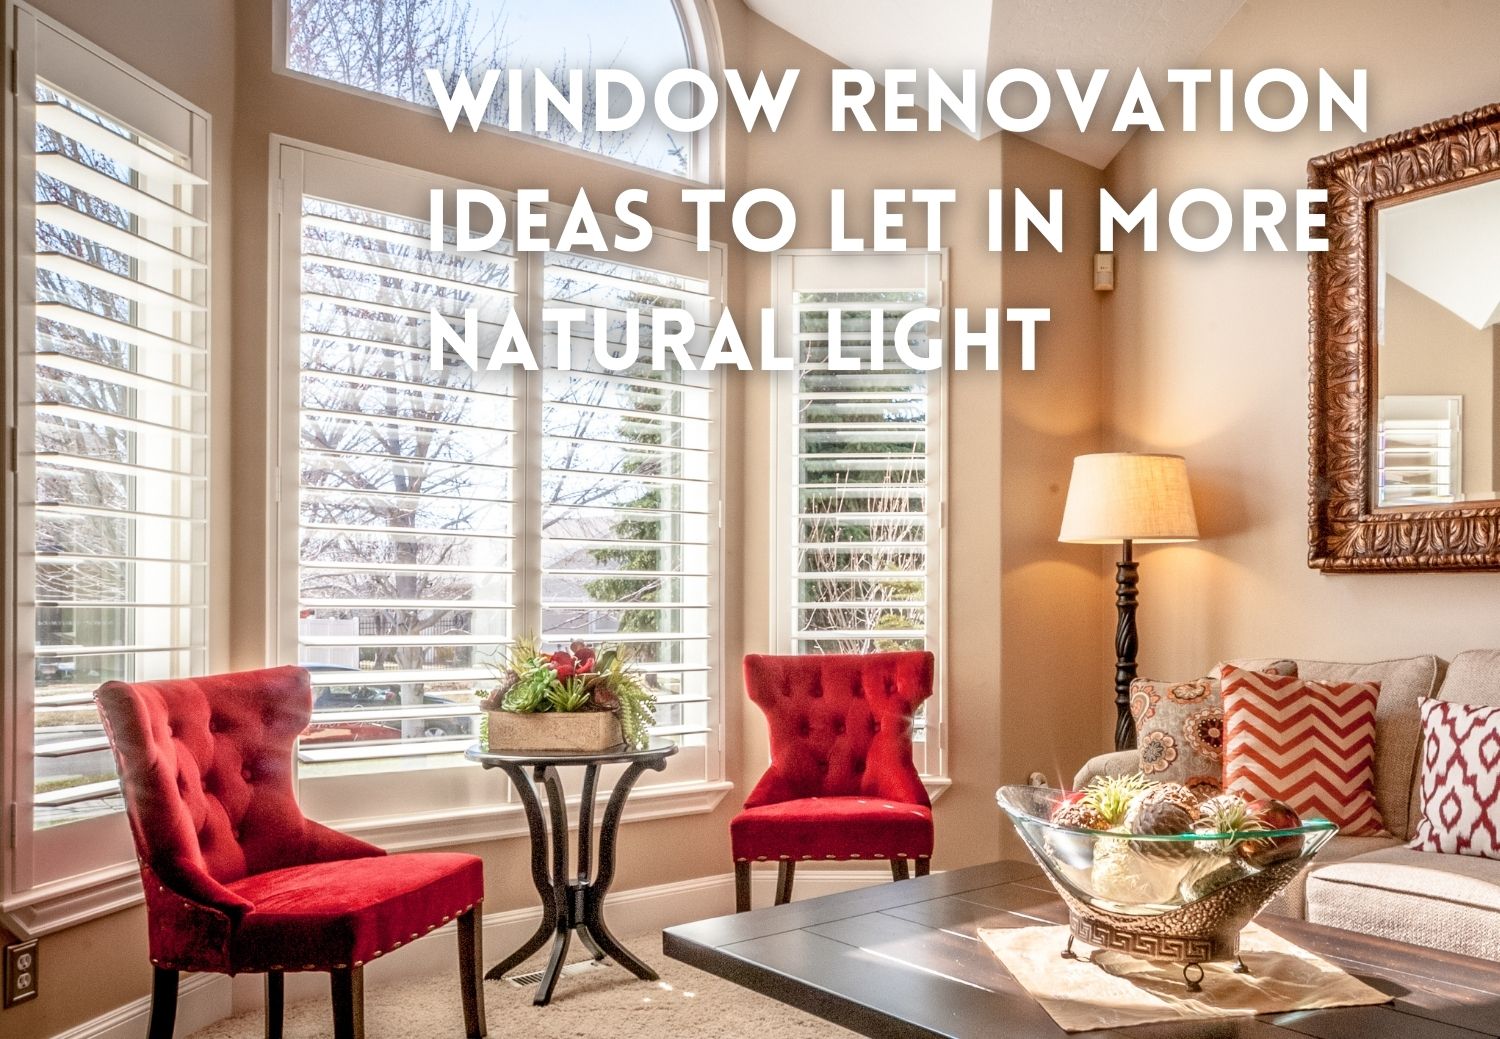 Window Renovation Ideas to Let in More Natural Light